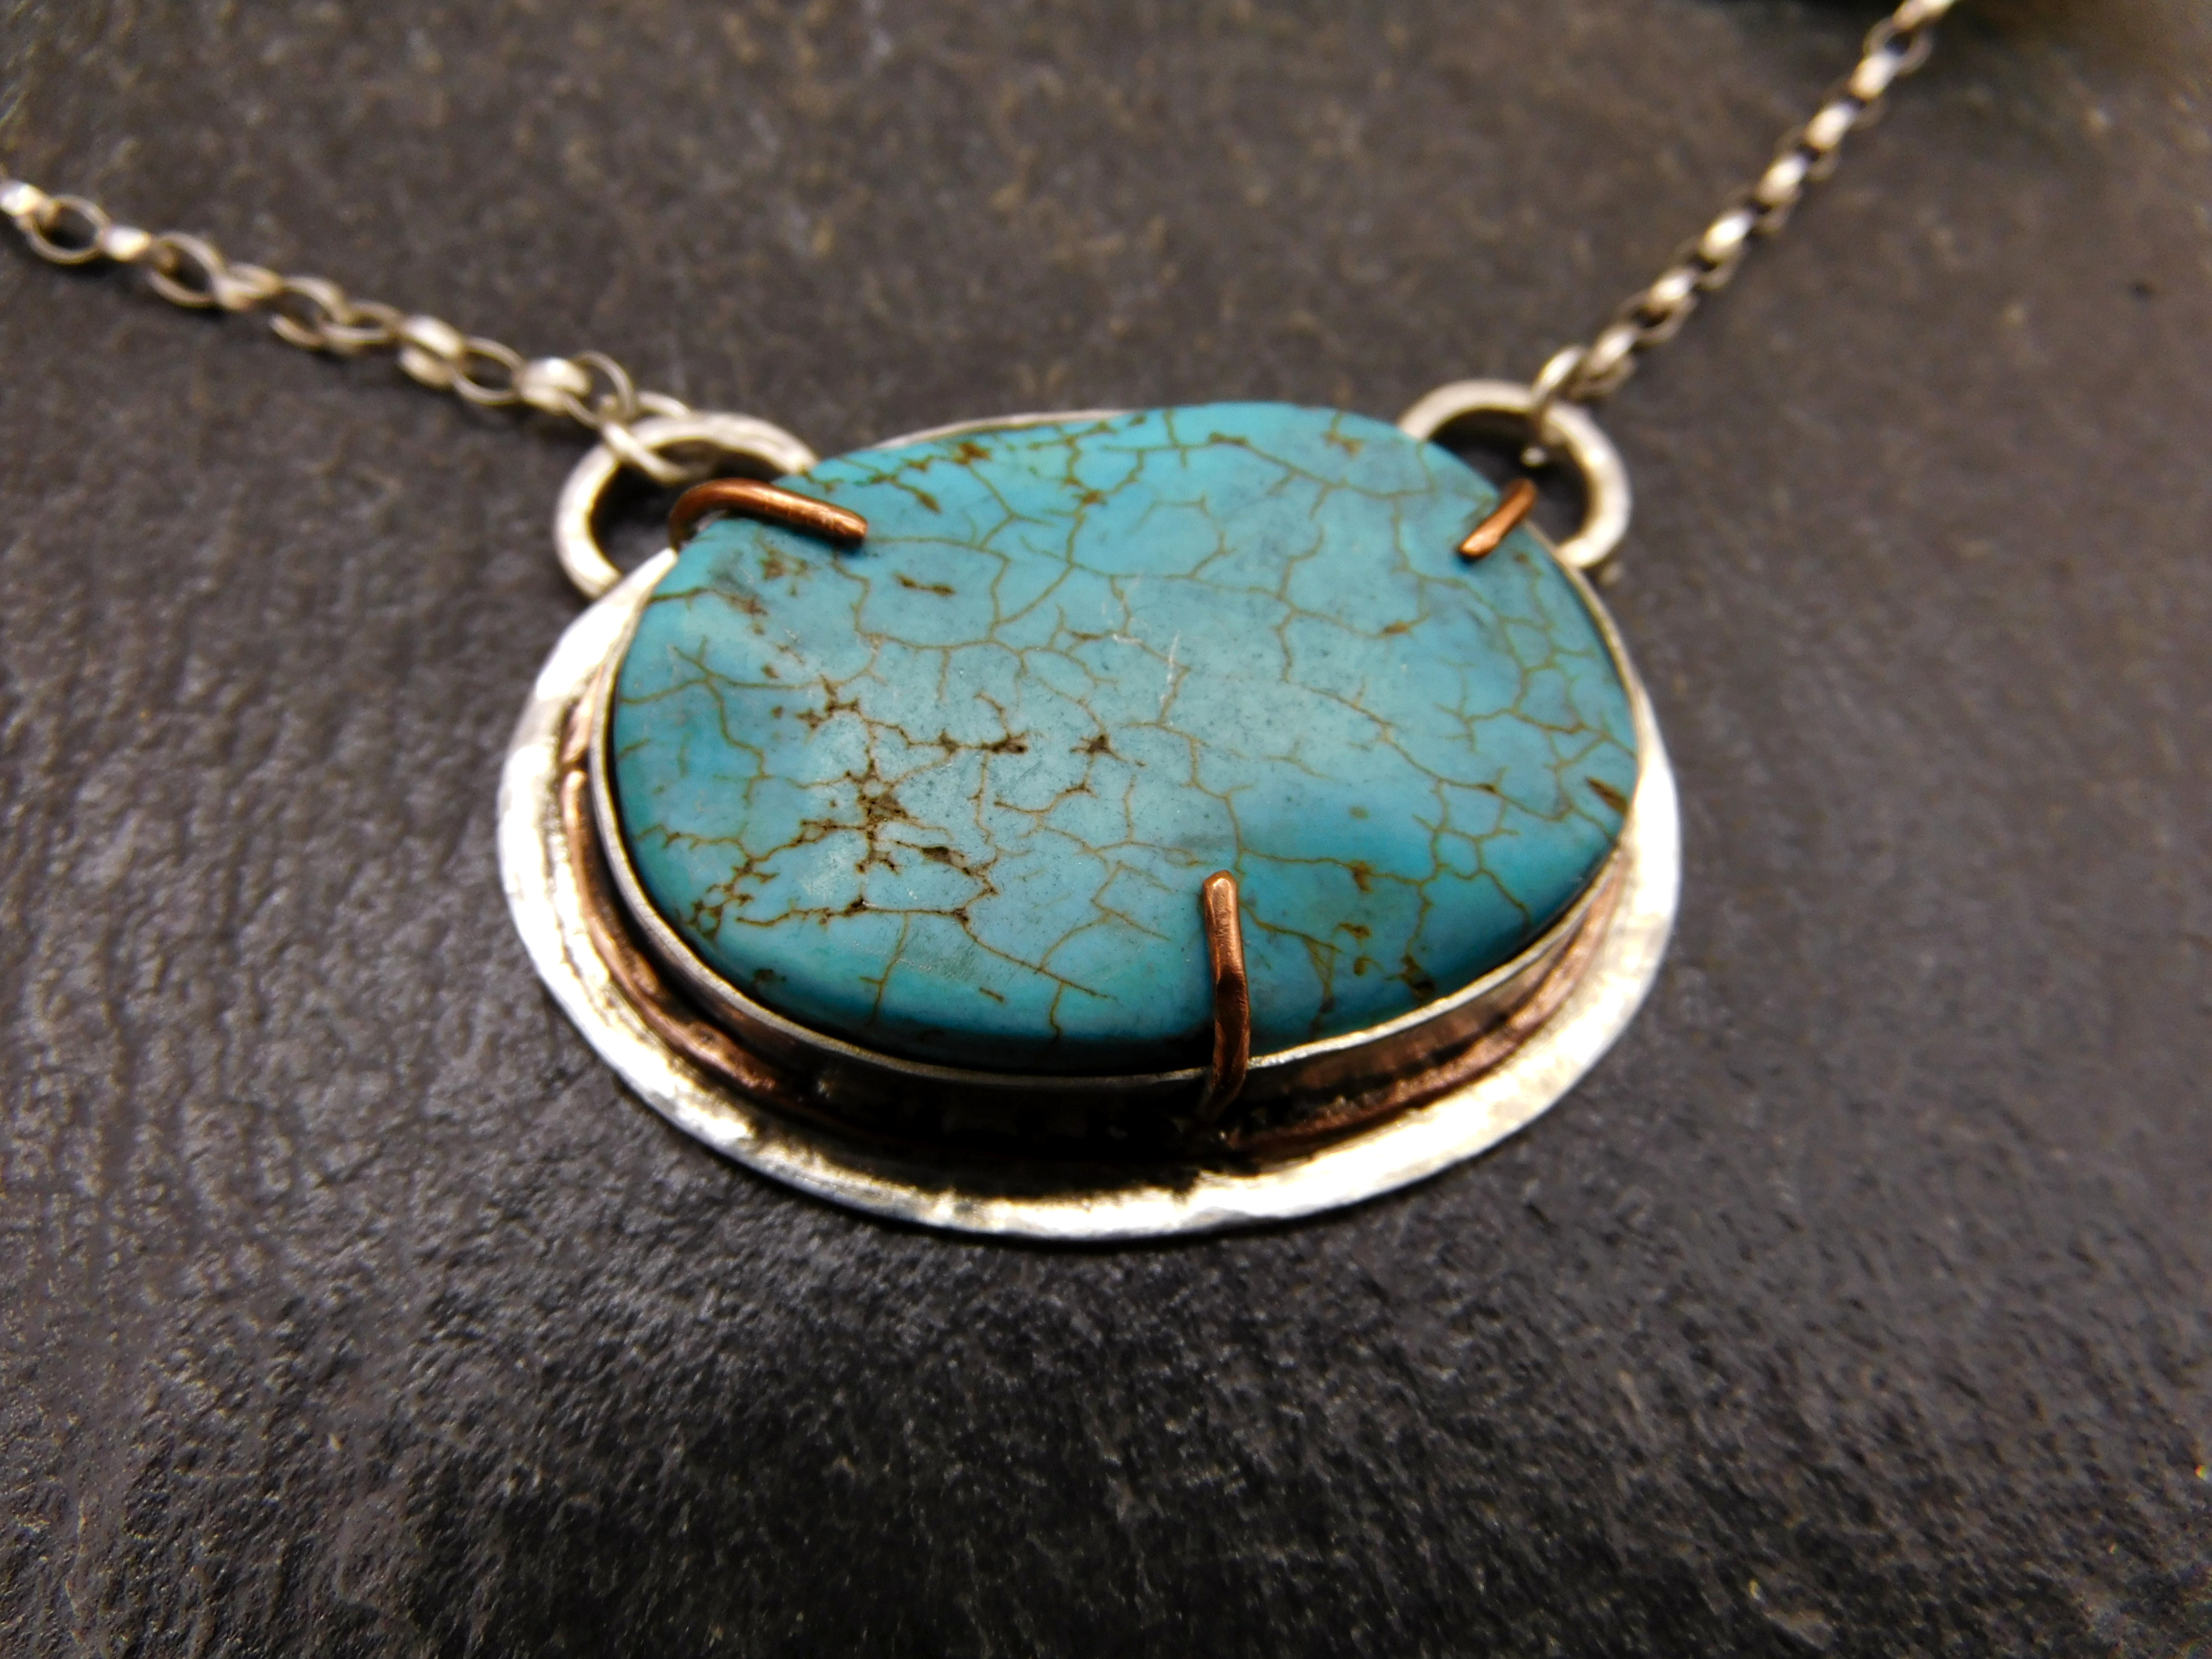 Pendant with turquoise Howlite stone set in sterling silver and copper